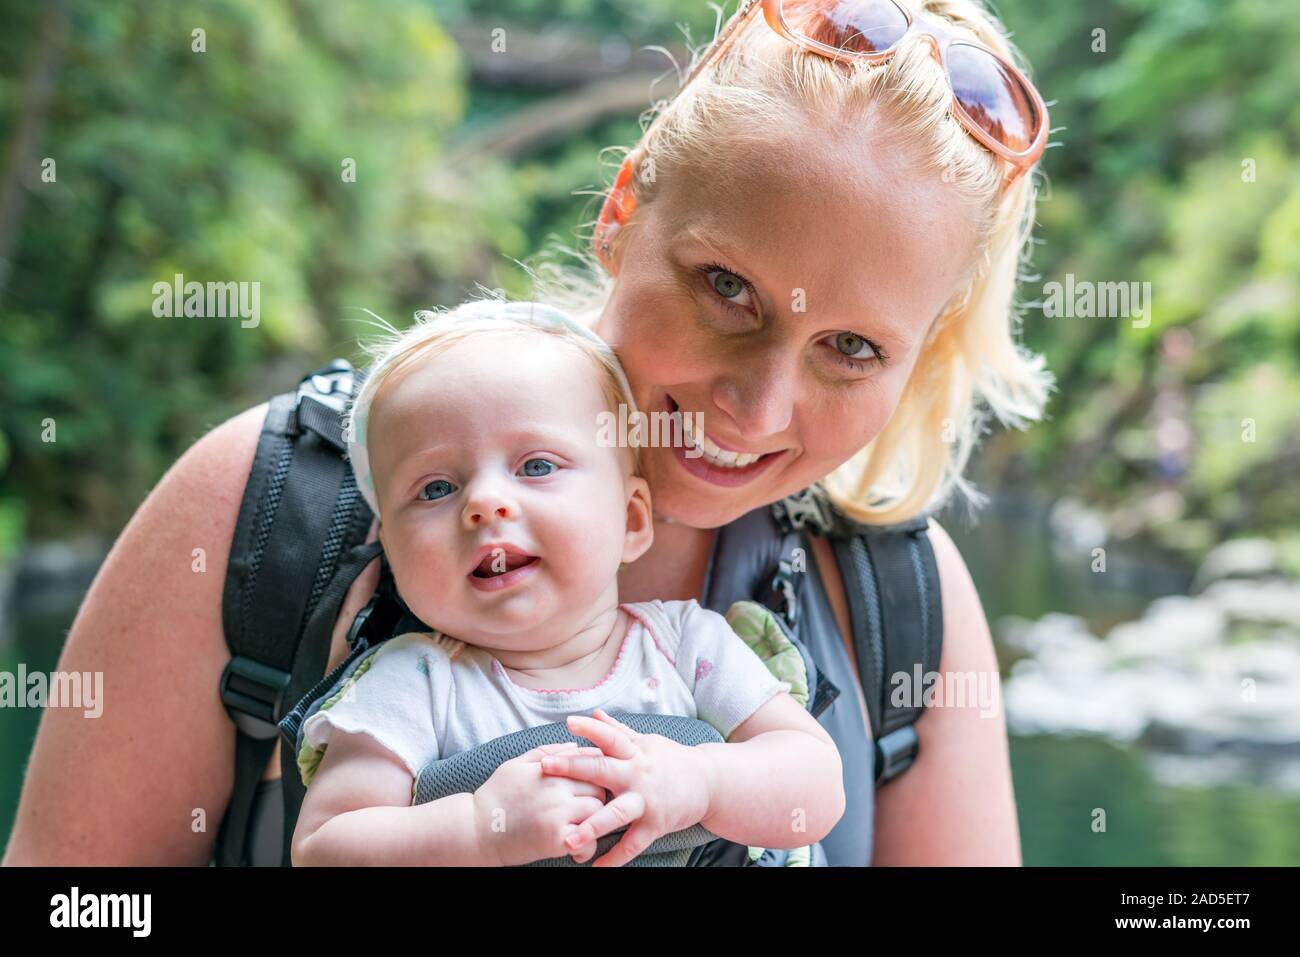 Happy, smiling mother carrying baby child in sling, ergonomic baby carrier. Walking outdoors in nature during summer. Stock Photo